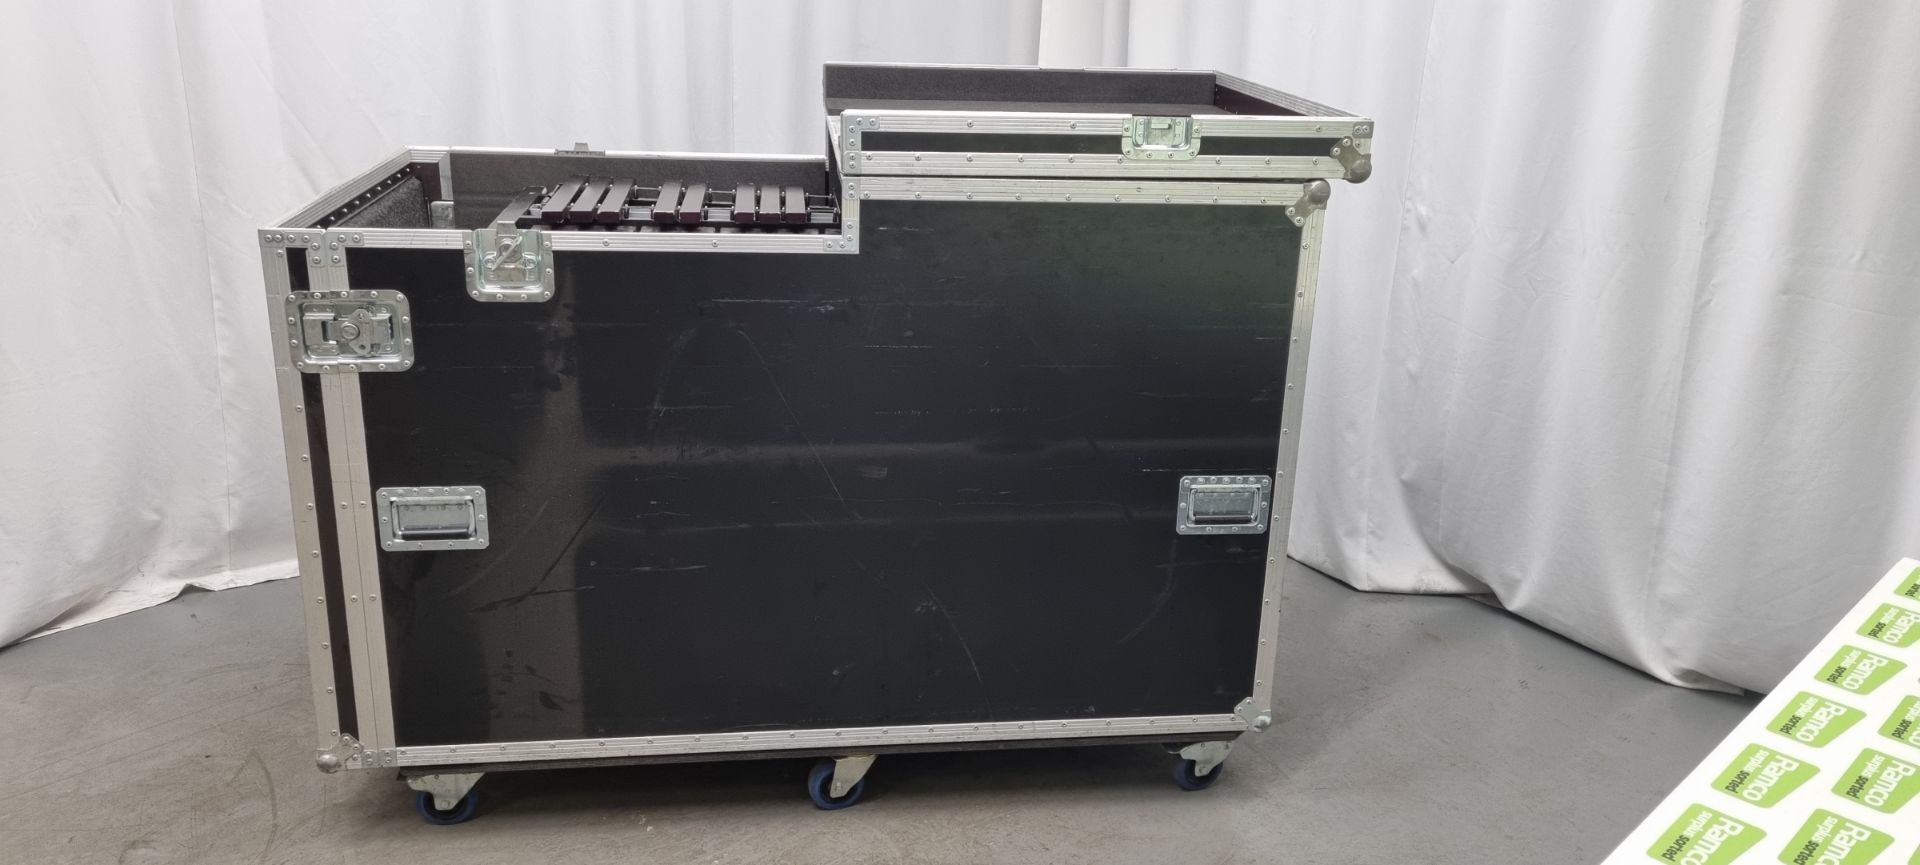 Musser M51 Xylophone with mobile transport case - Image 16 of 21